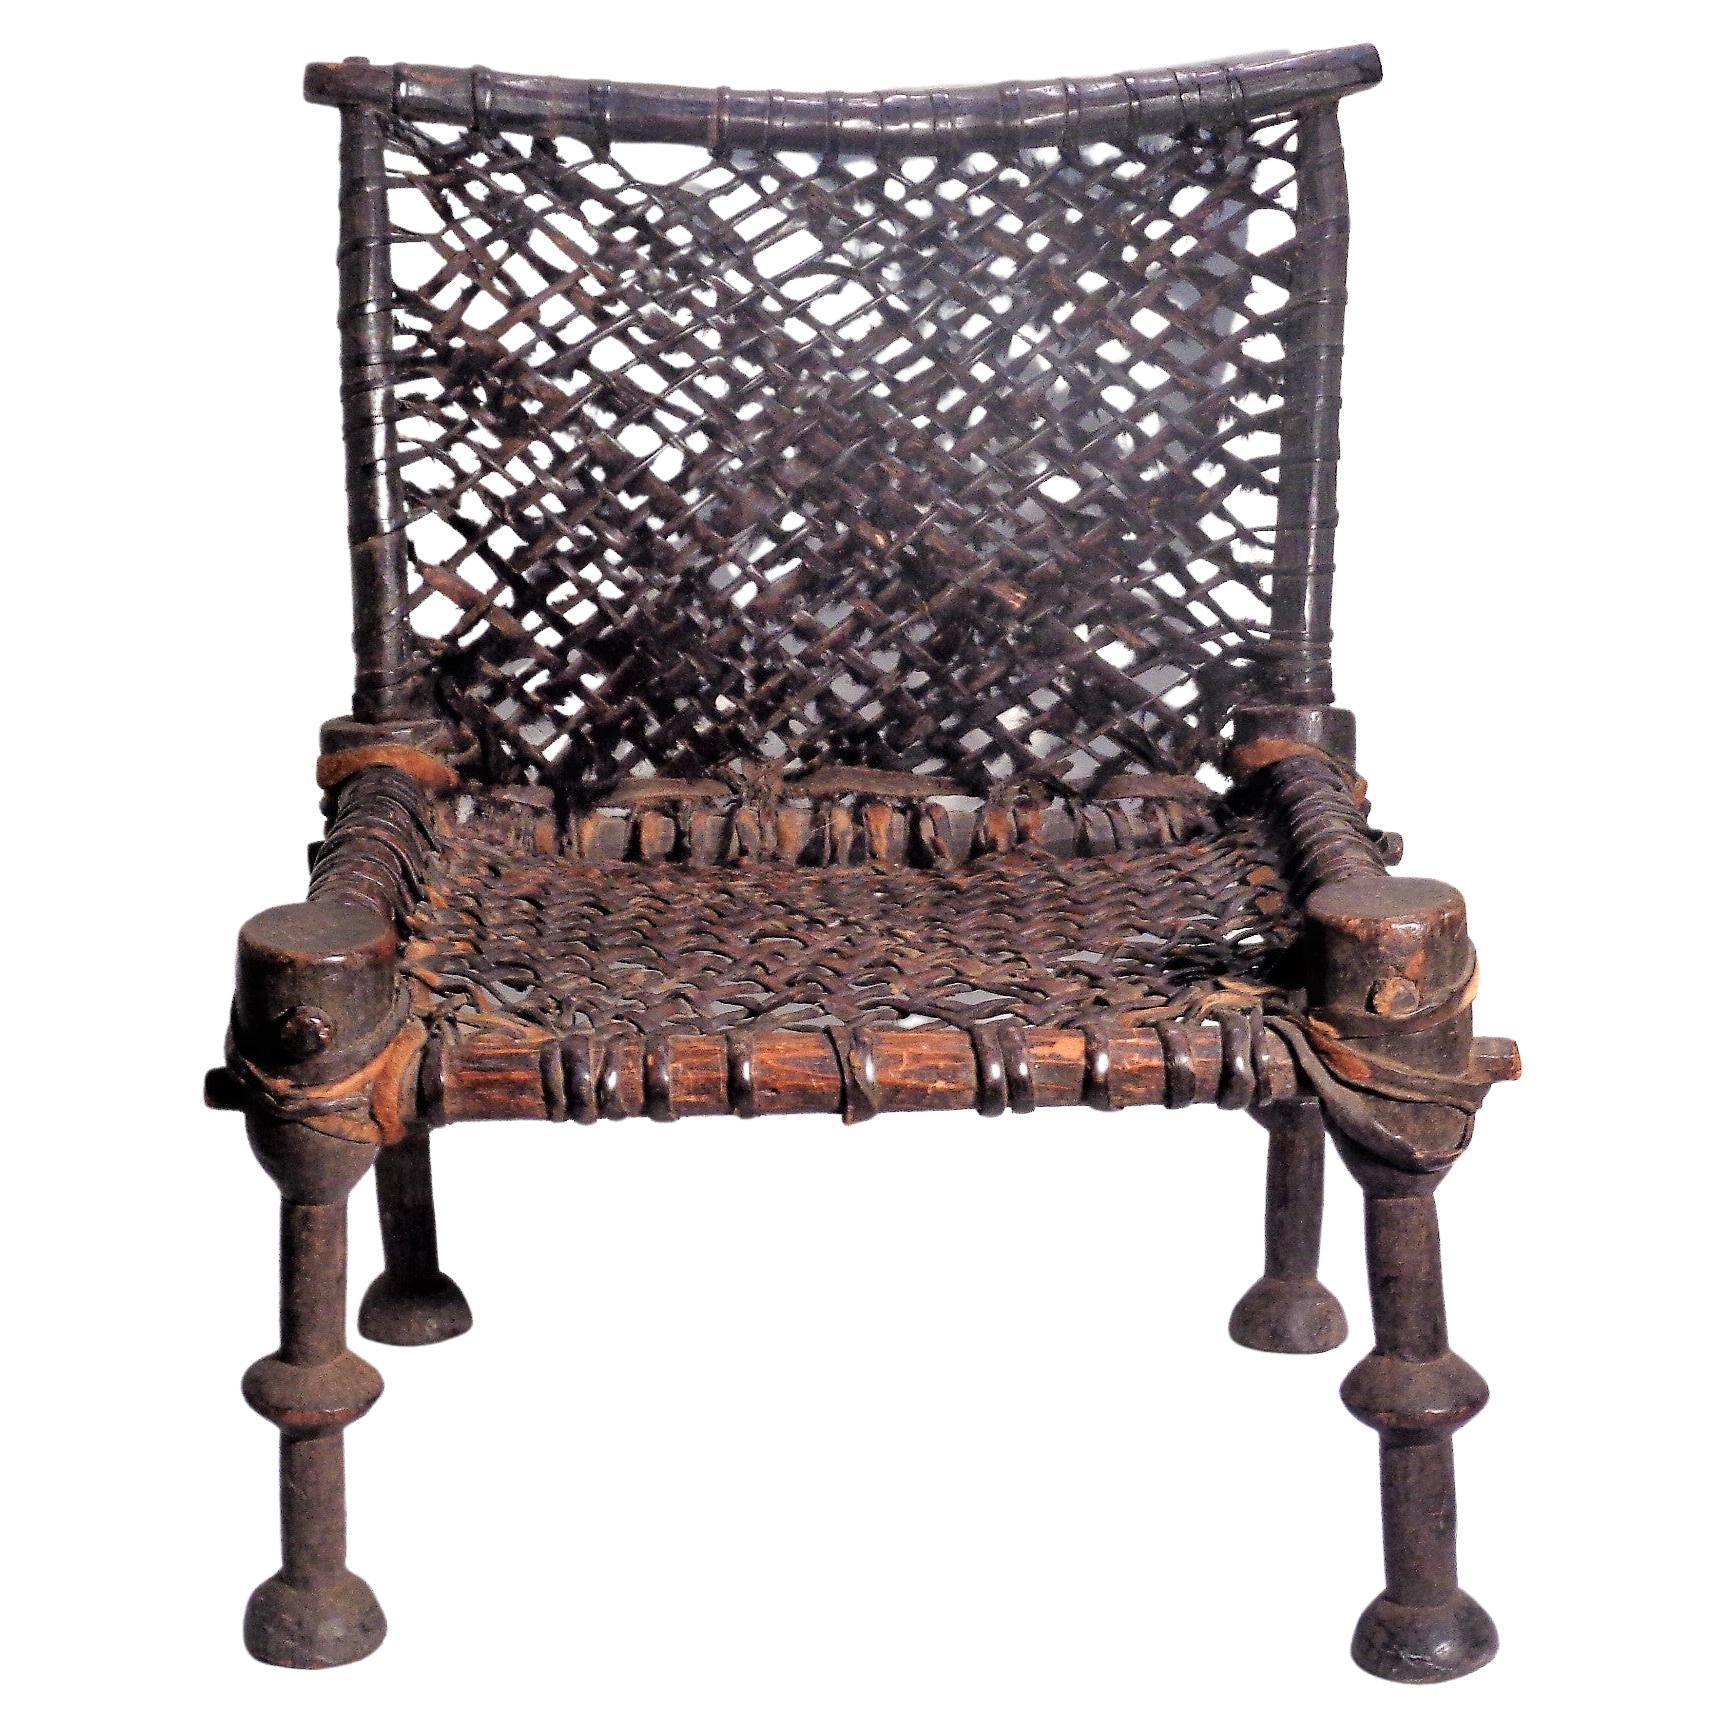 Ethiopian 19th Century African Wood and Leather Chair For Sale